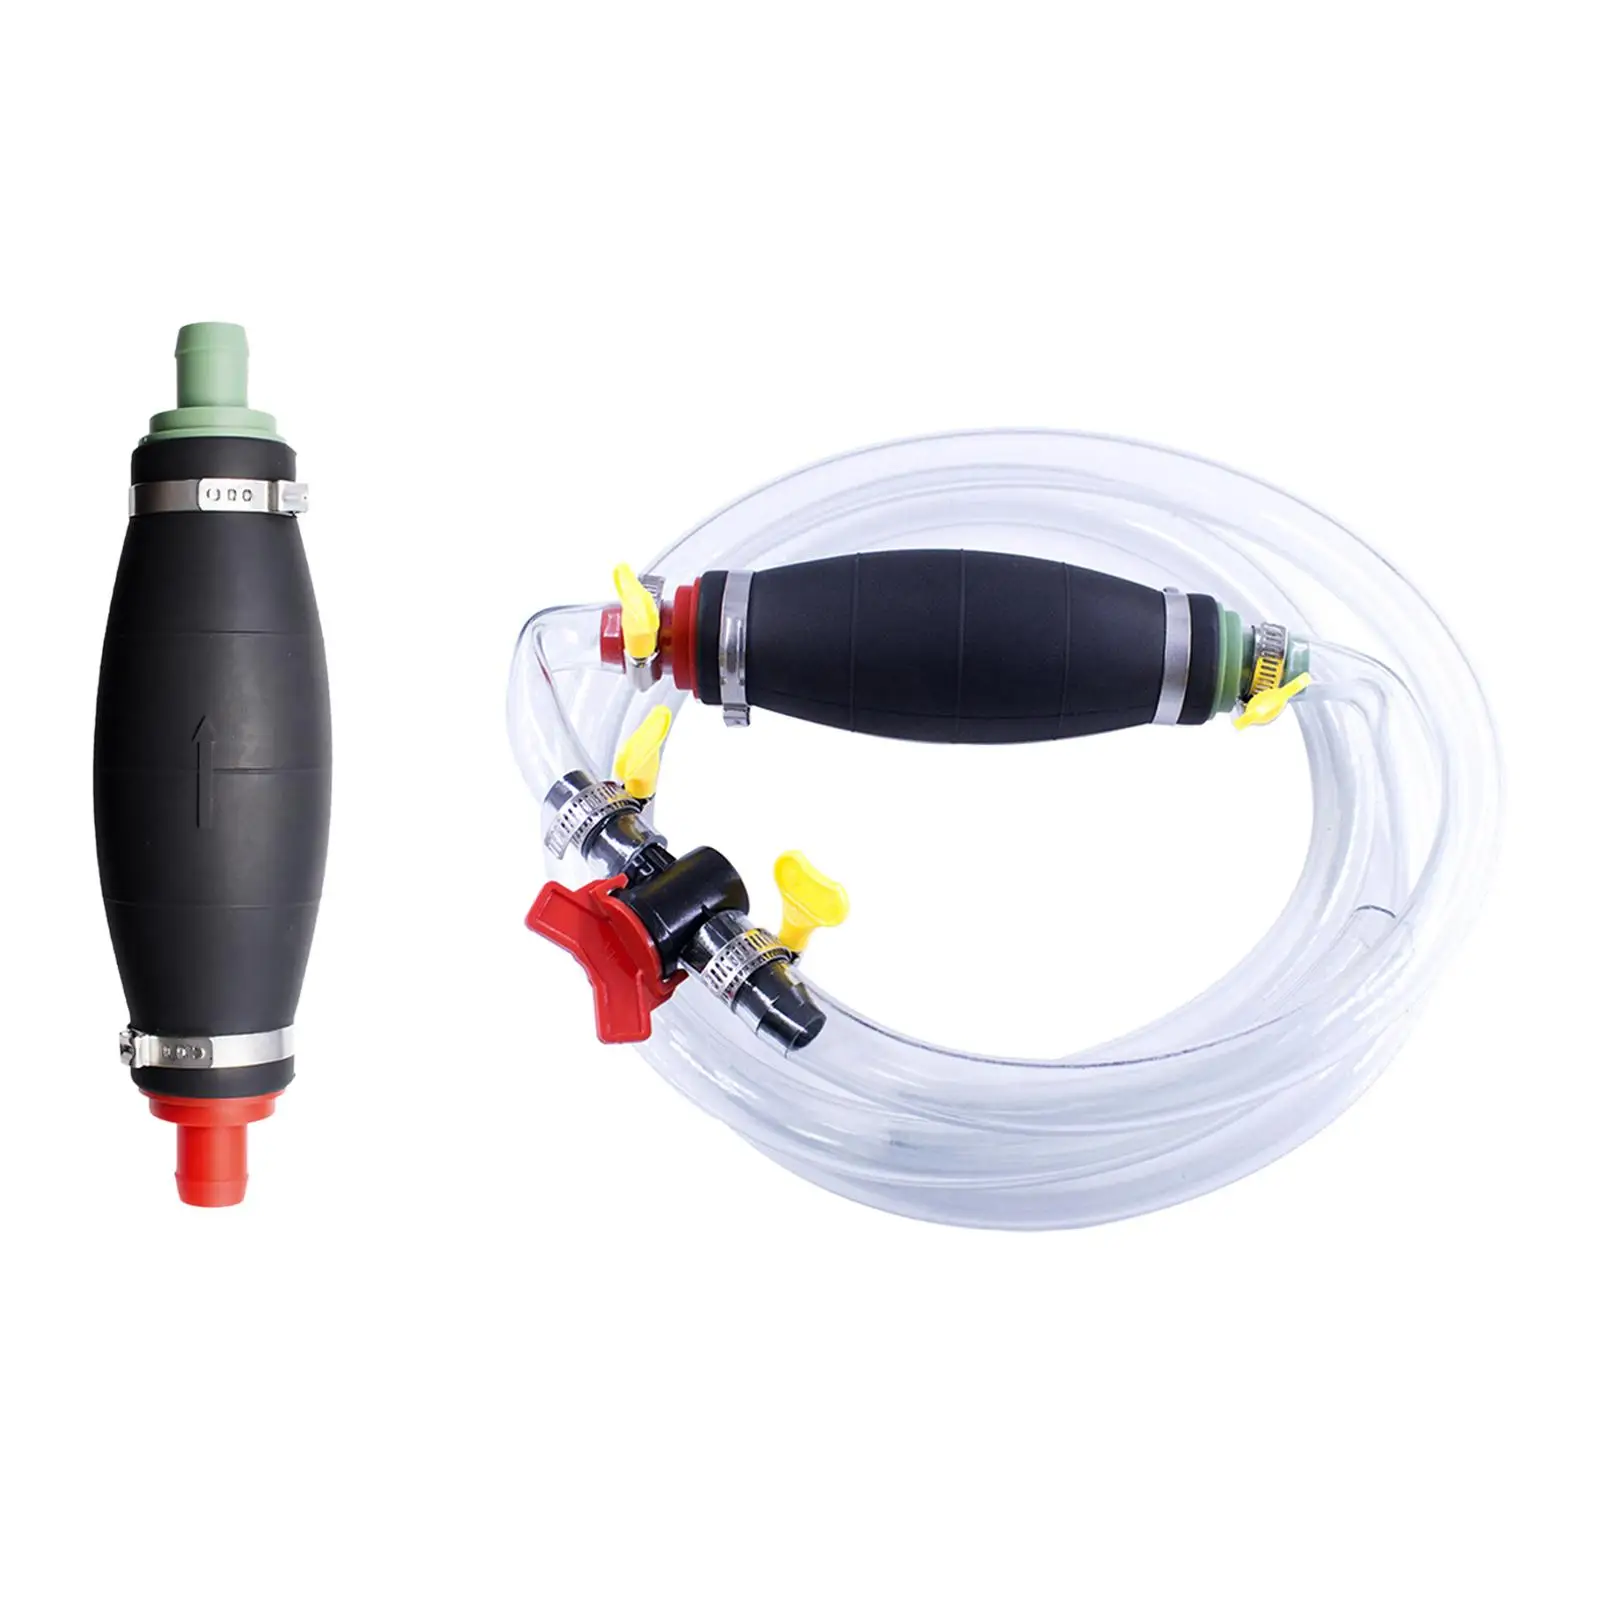 Pump Hand Pump Multifunction Manual for Water Gas Oil